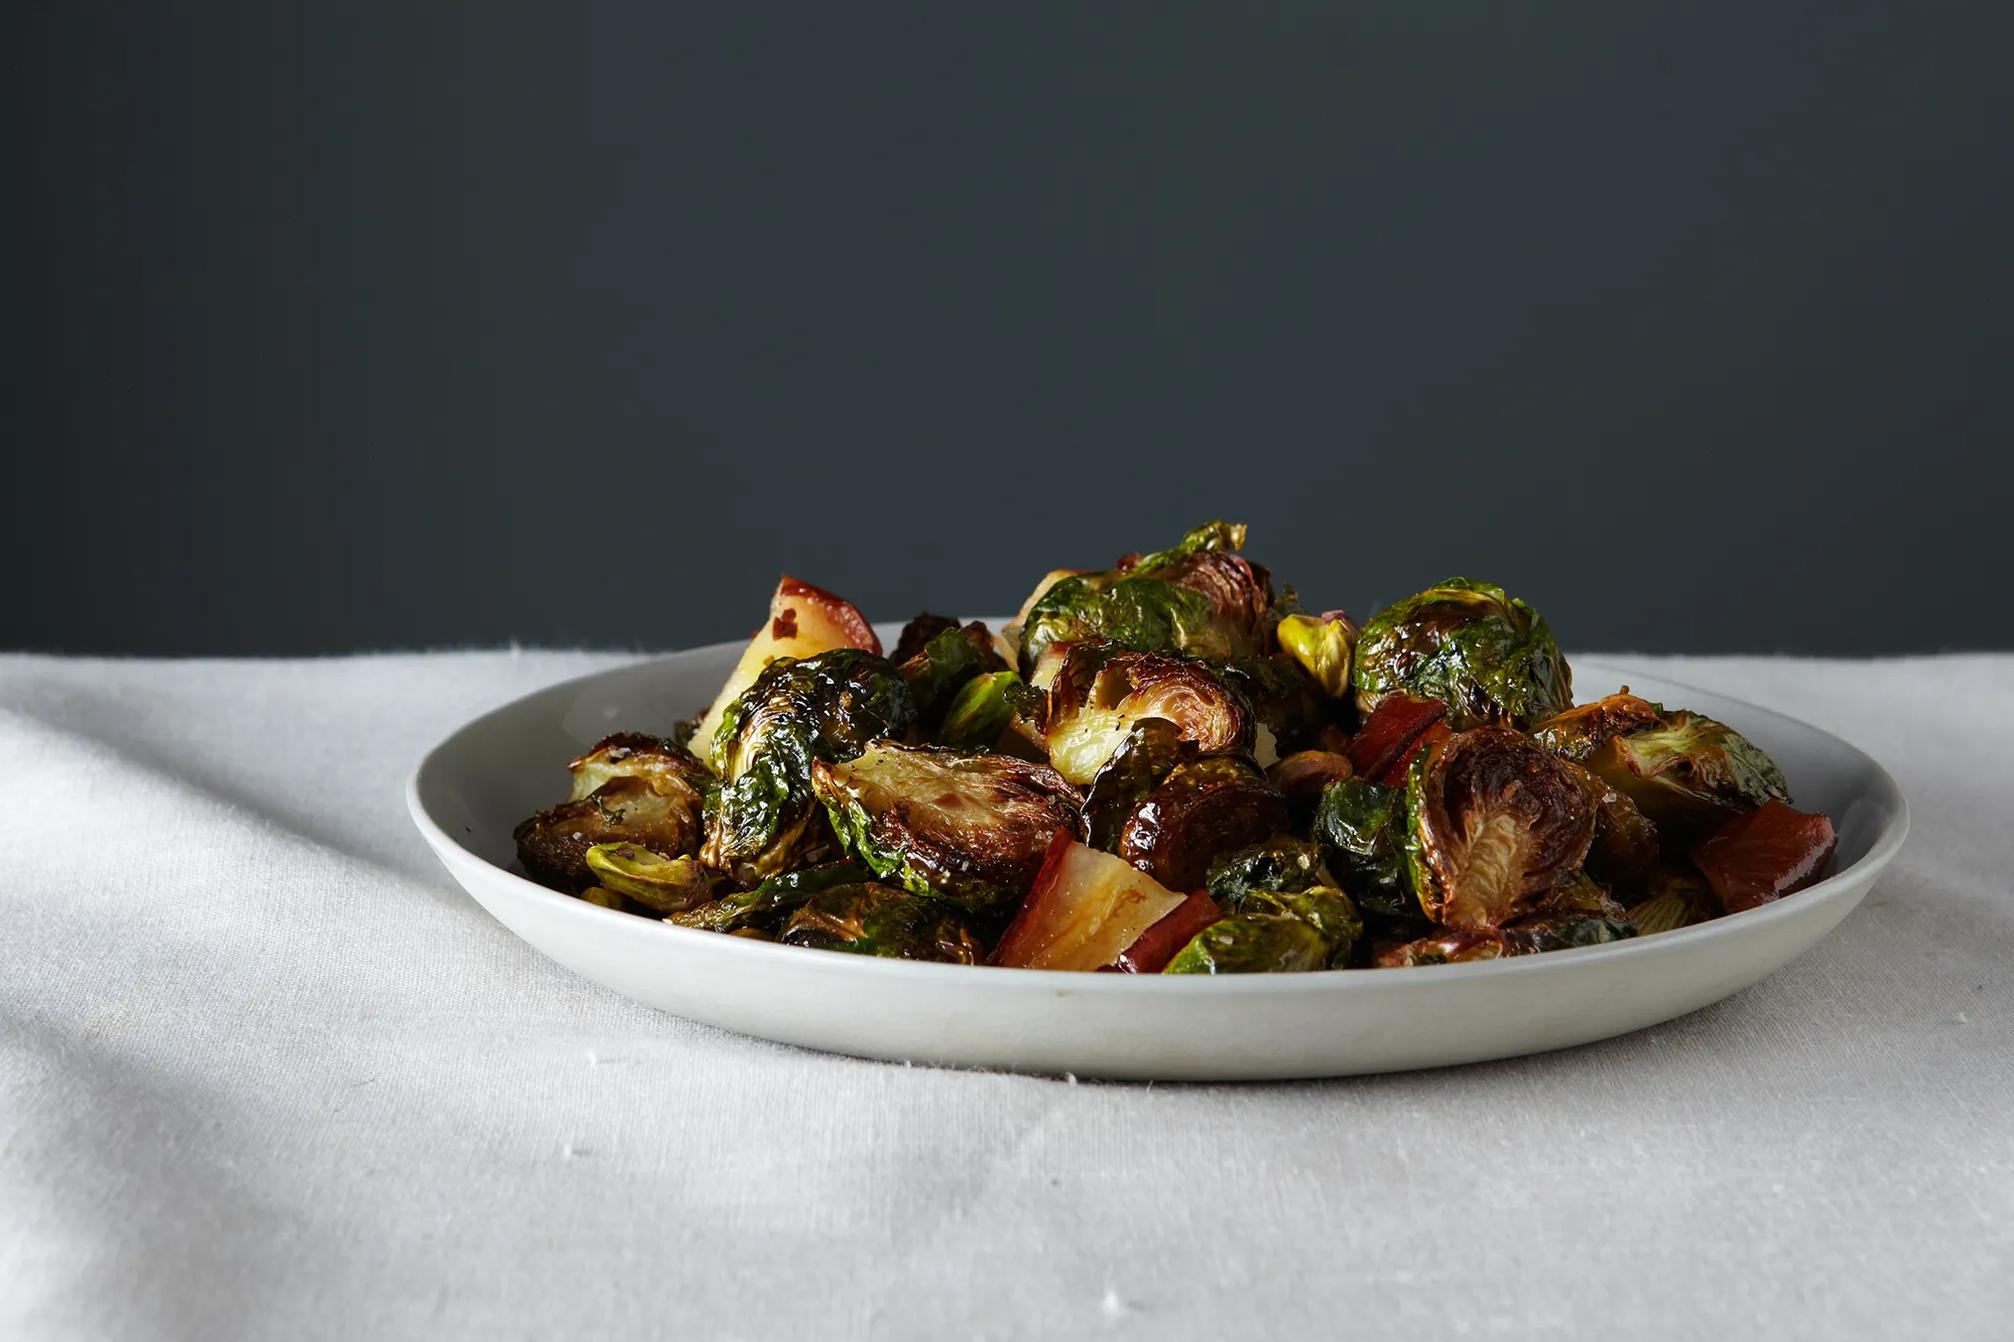  Perfectly roasted Brussel sprouts with a sweet and savory twist